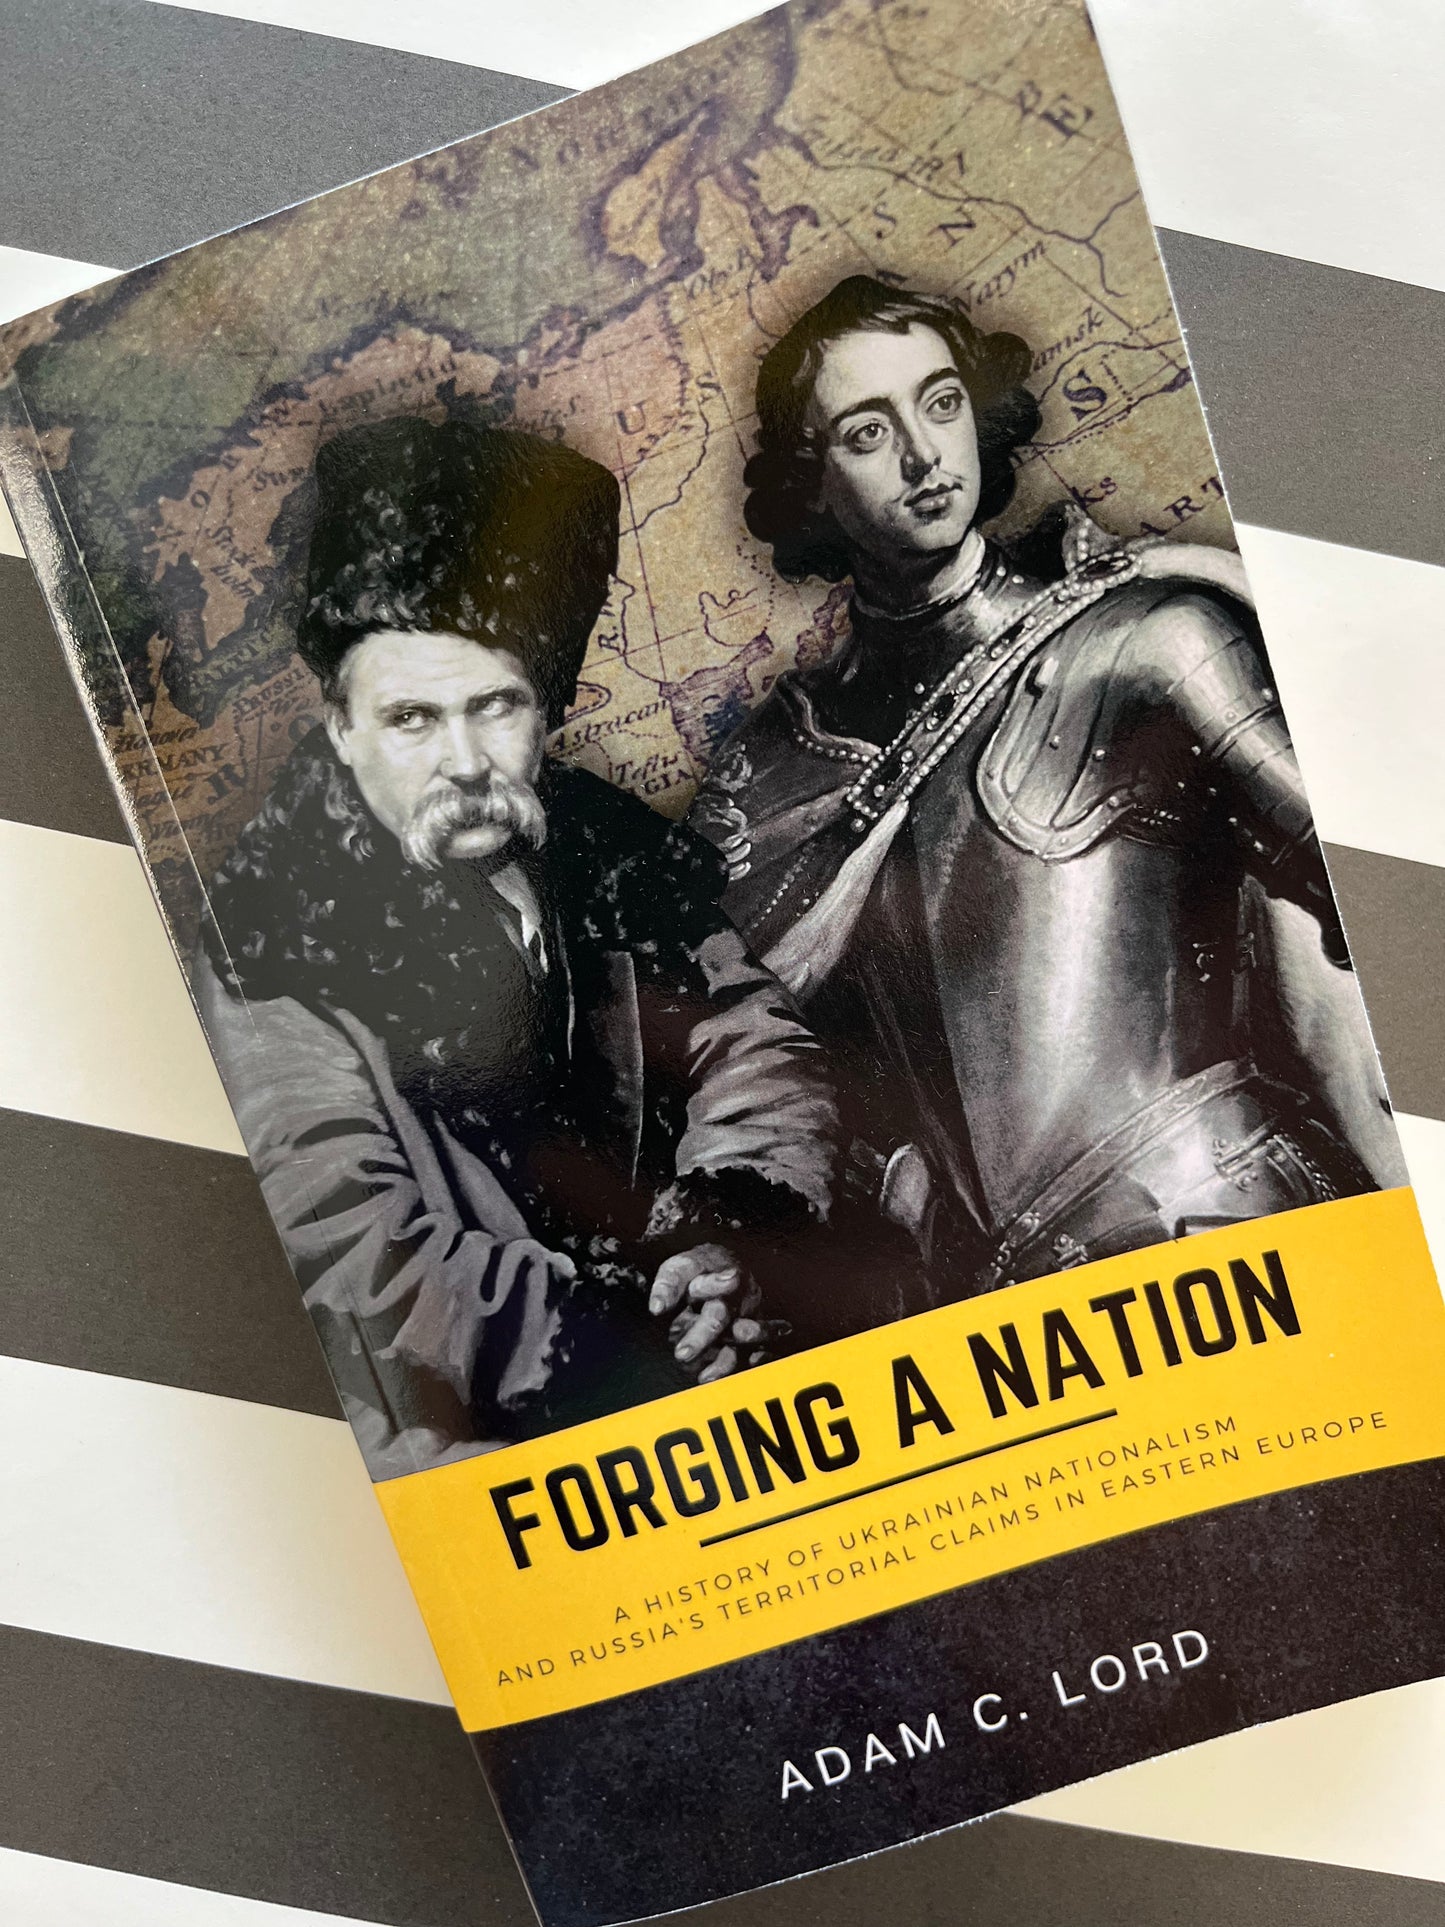 Forging A Nation: A History of Ukrainian Nationalism and Russia's Territorial Claims in Easter Europe